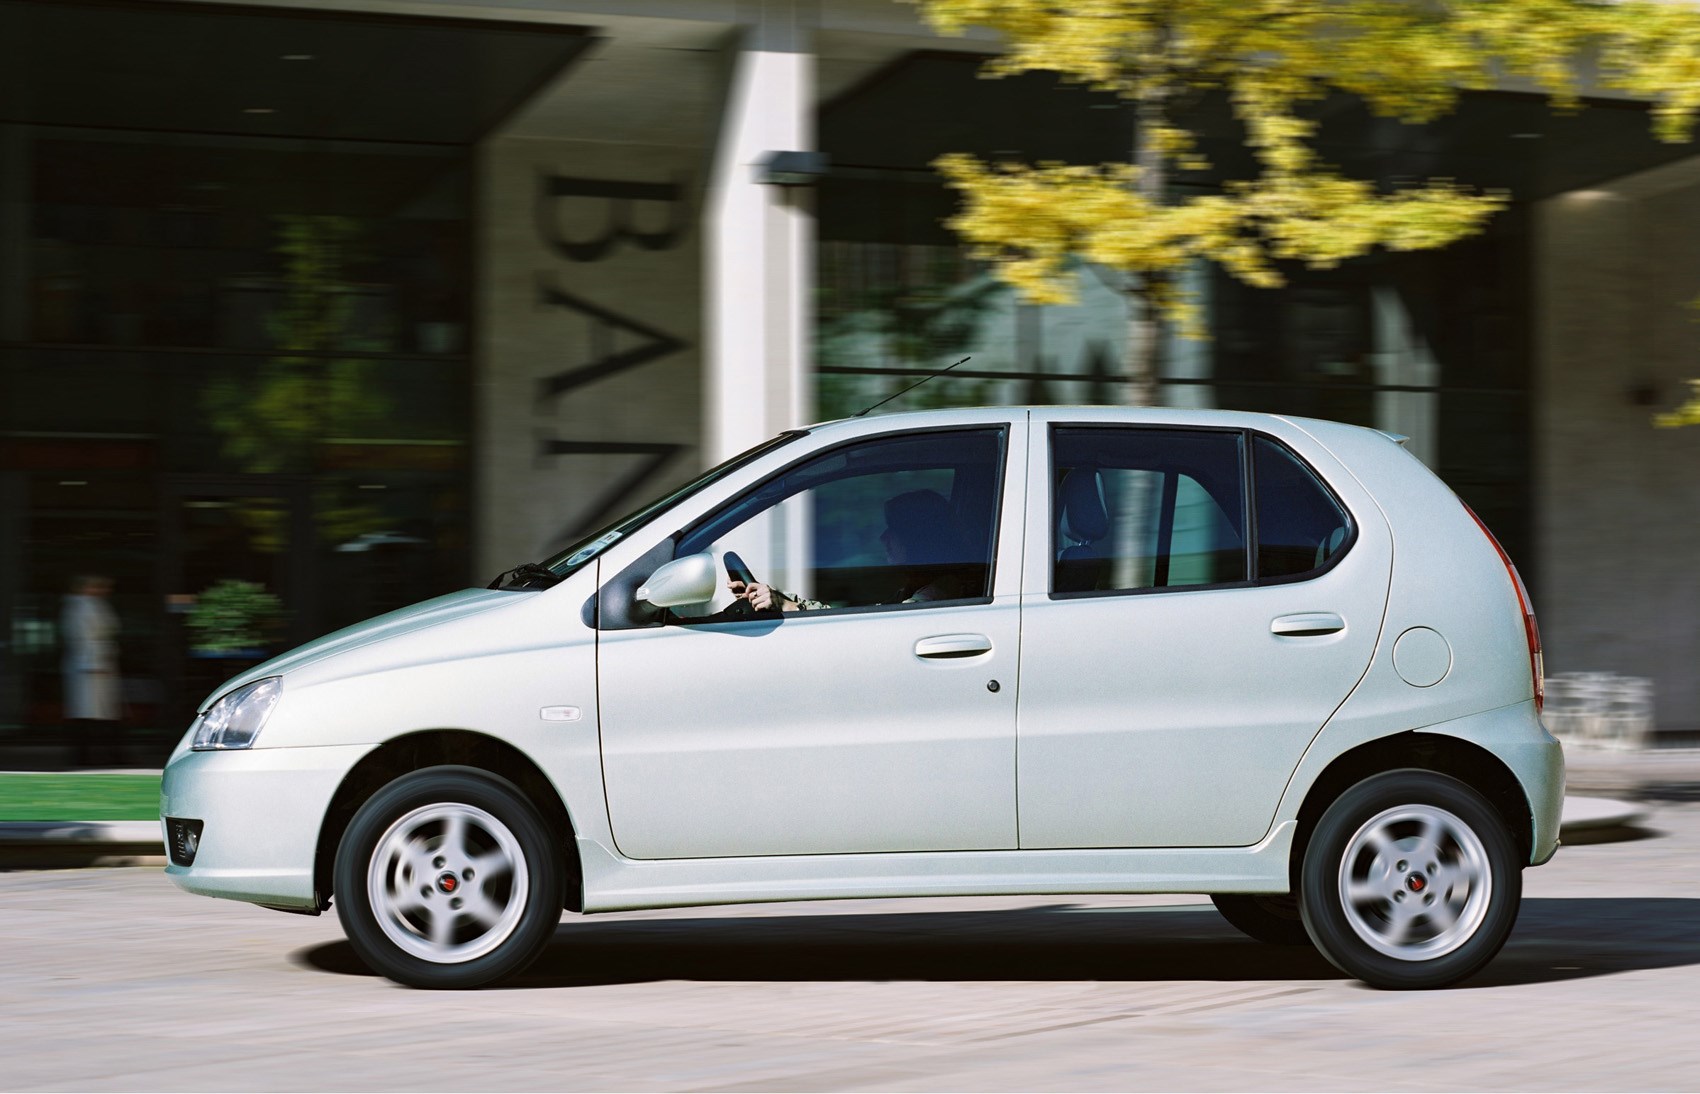 Used Rover CityRover Hatchback (2003 - 2005) Review  Parkers